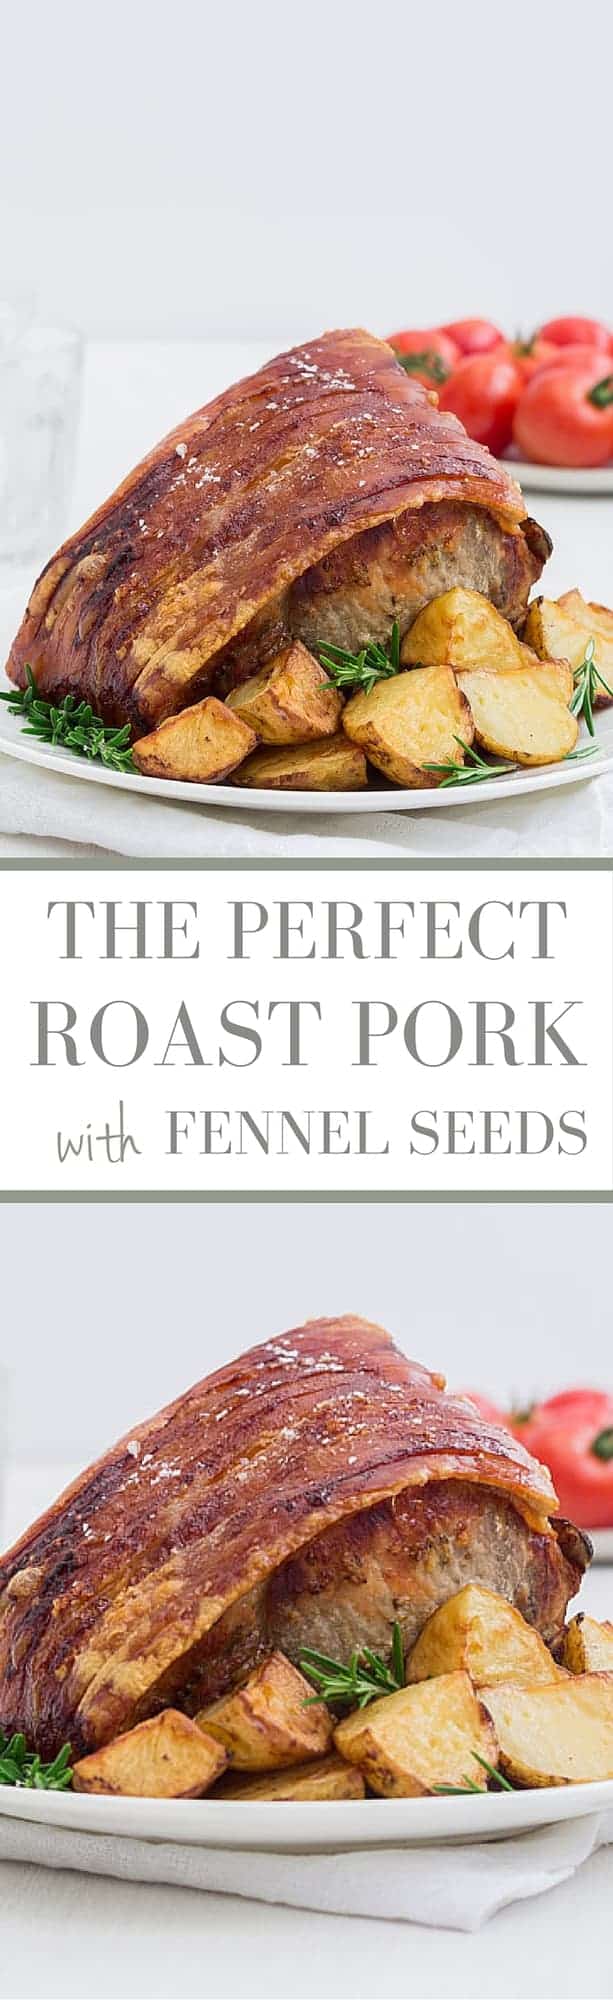 The Perfect Roast Pork Recipe | Recipes From A Pantry